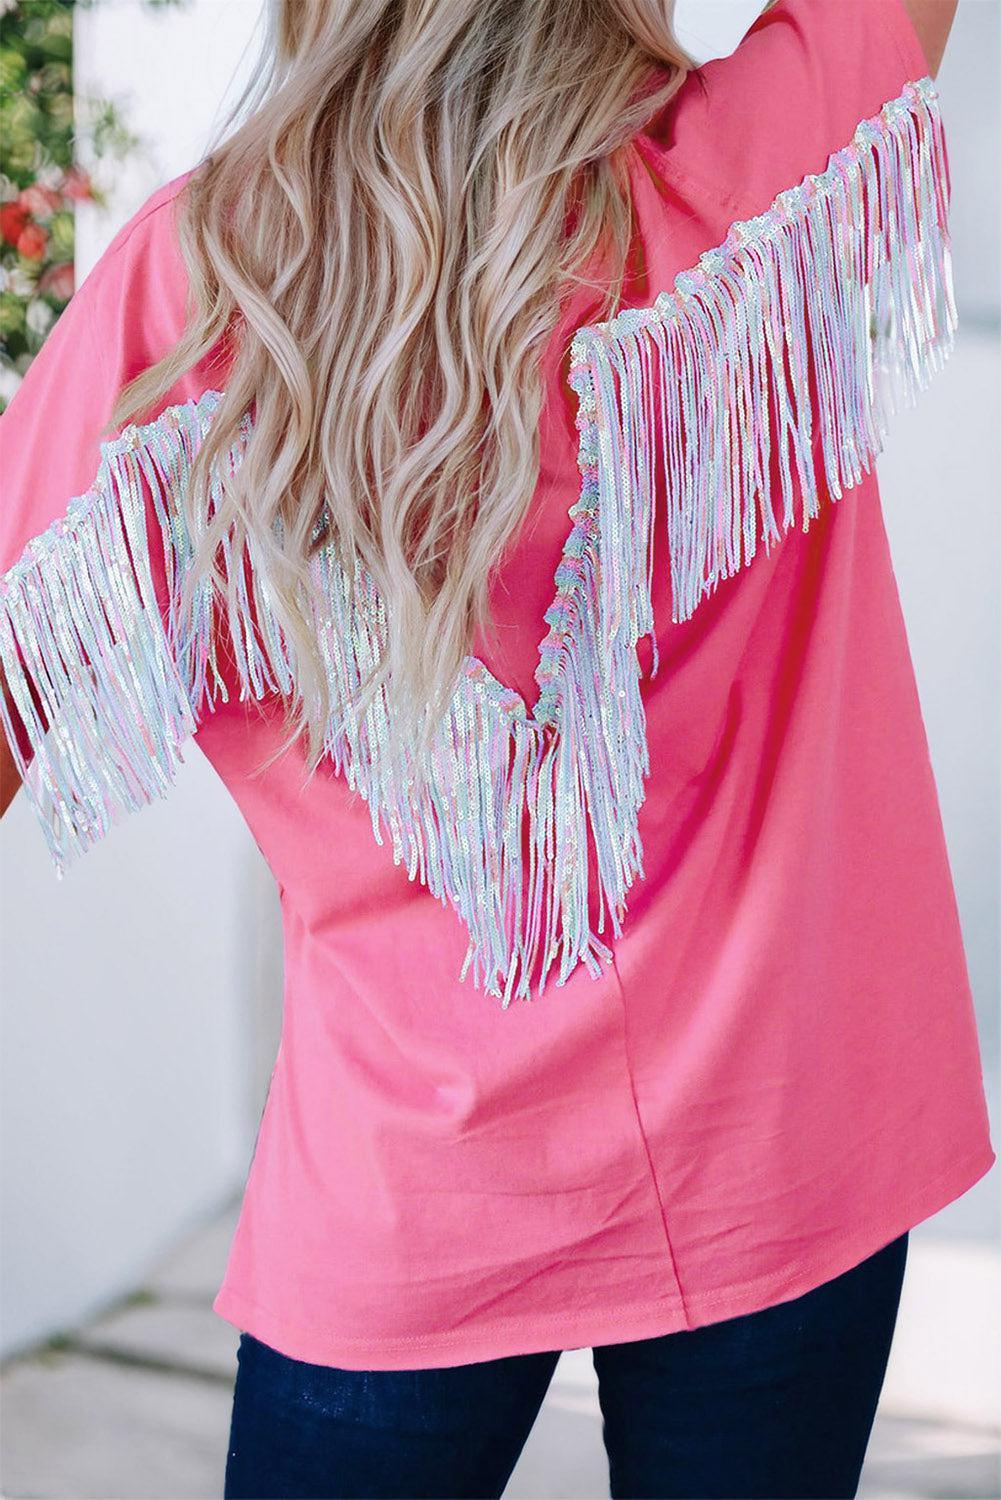 a woman wearing a pink top with white fringes